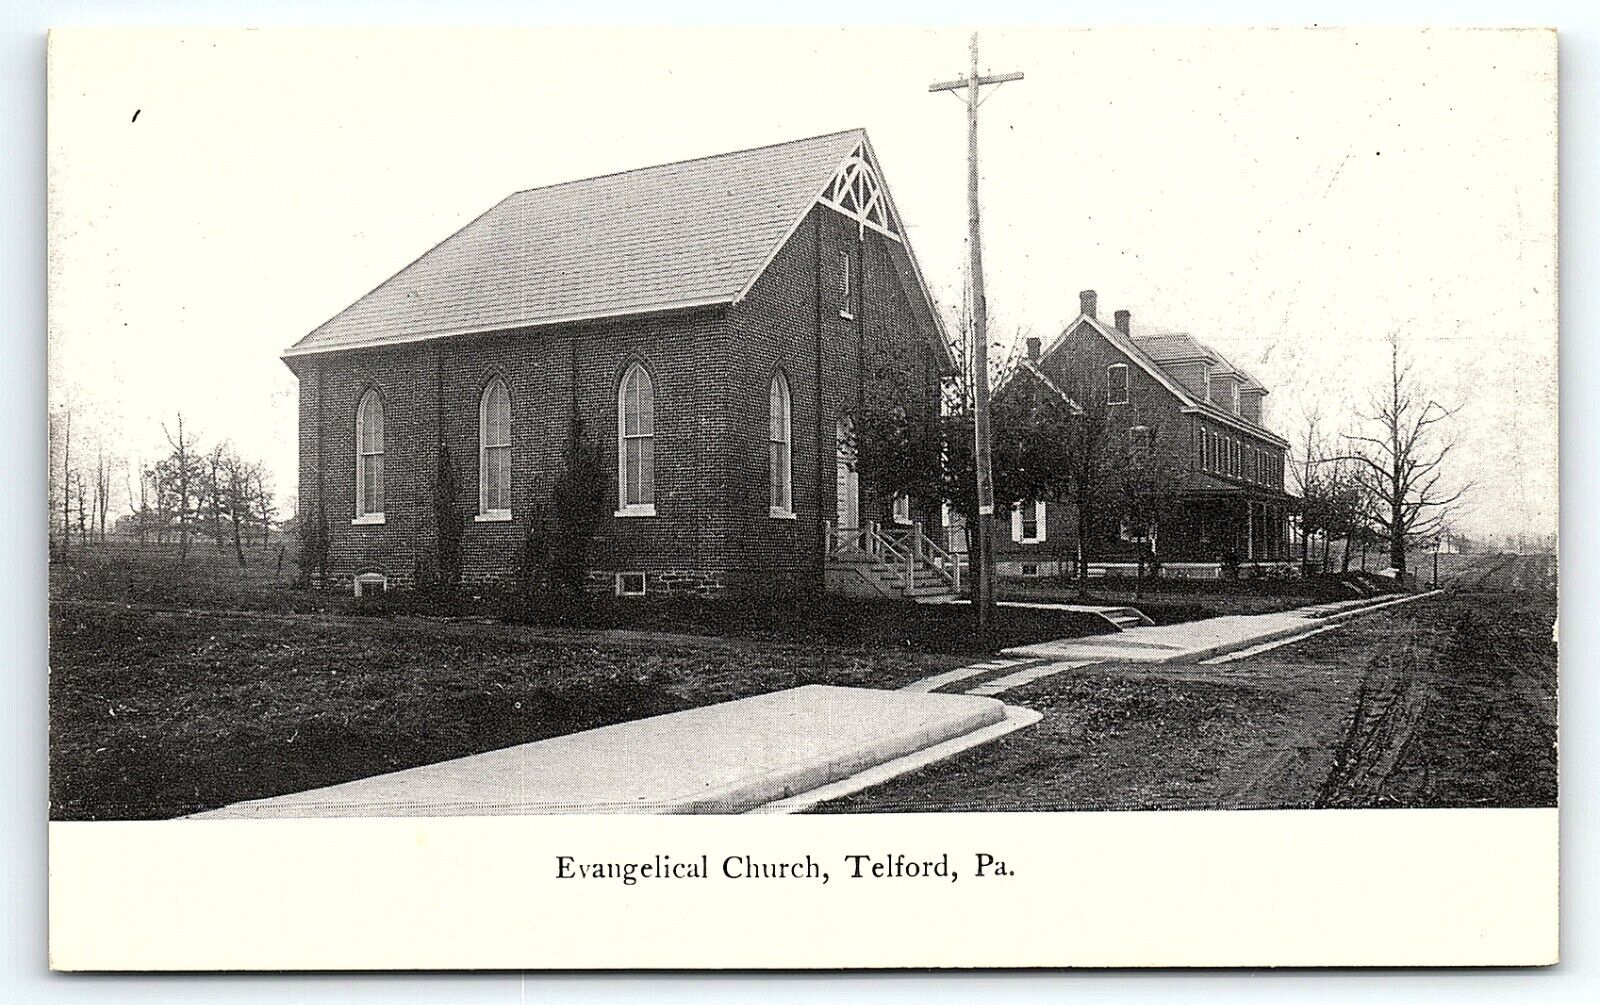 c1910 TELFORD PA EVANGELICAL CHURCH STREET VIEW EARLY UNPOSTED POSTCARD P3987